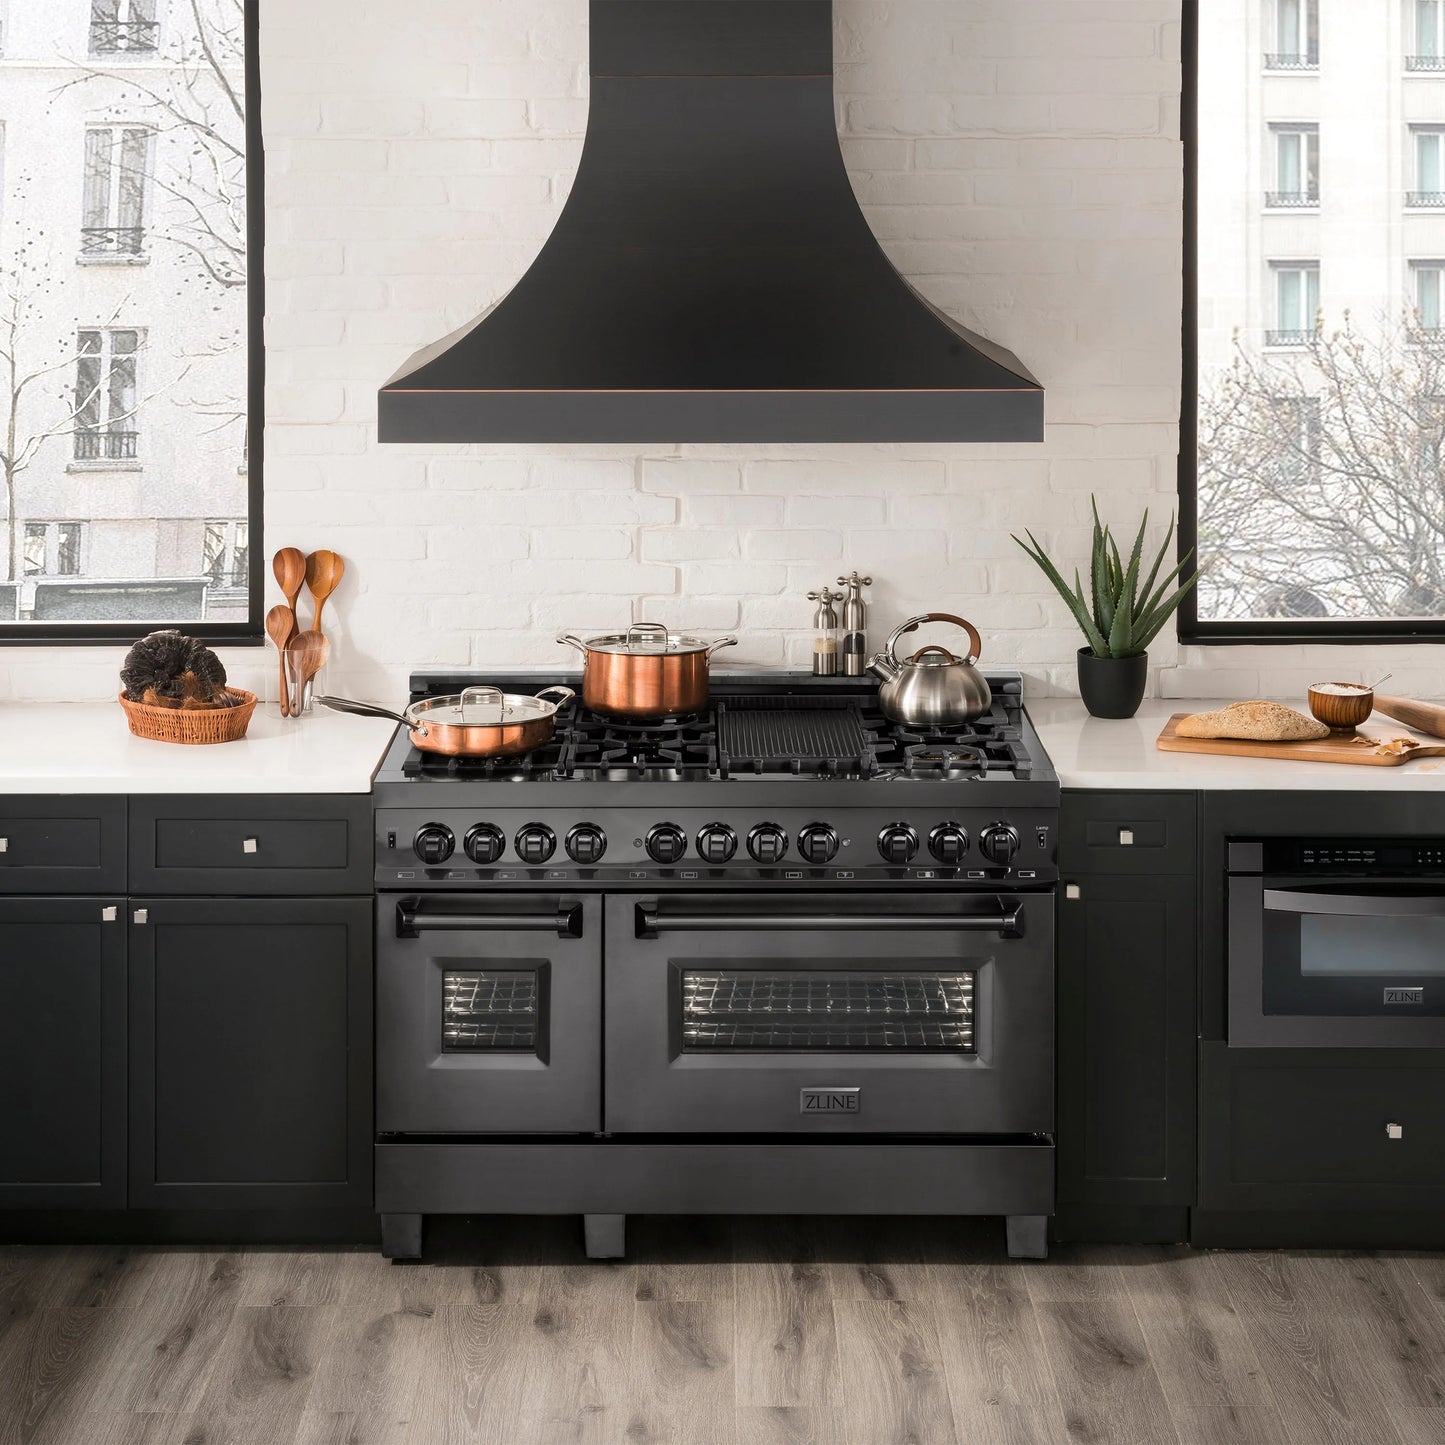 ZLINE 48 in. Dual Fuel Range with Gas Stove and Electric Oven in Black Stainless Steel with Brass Burners (RAB-BR-48)